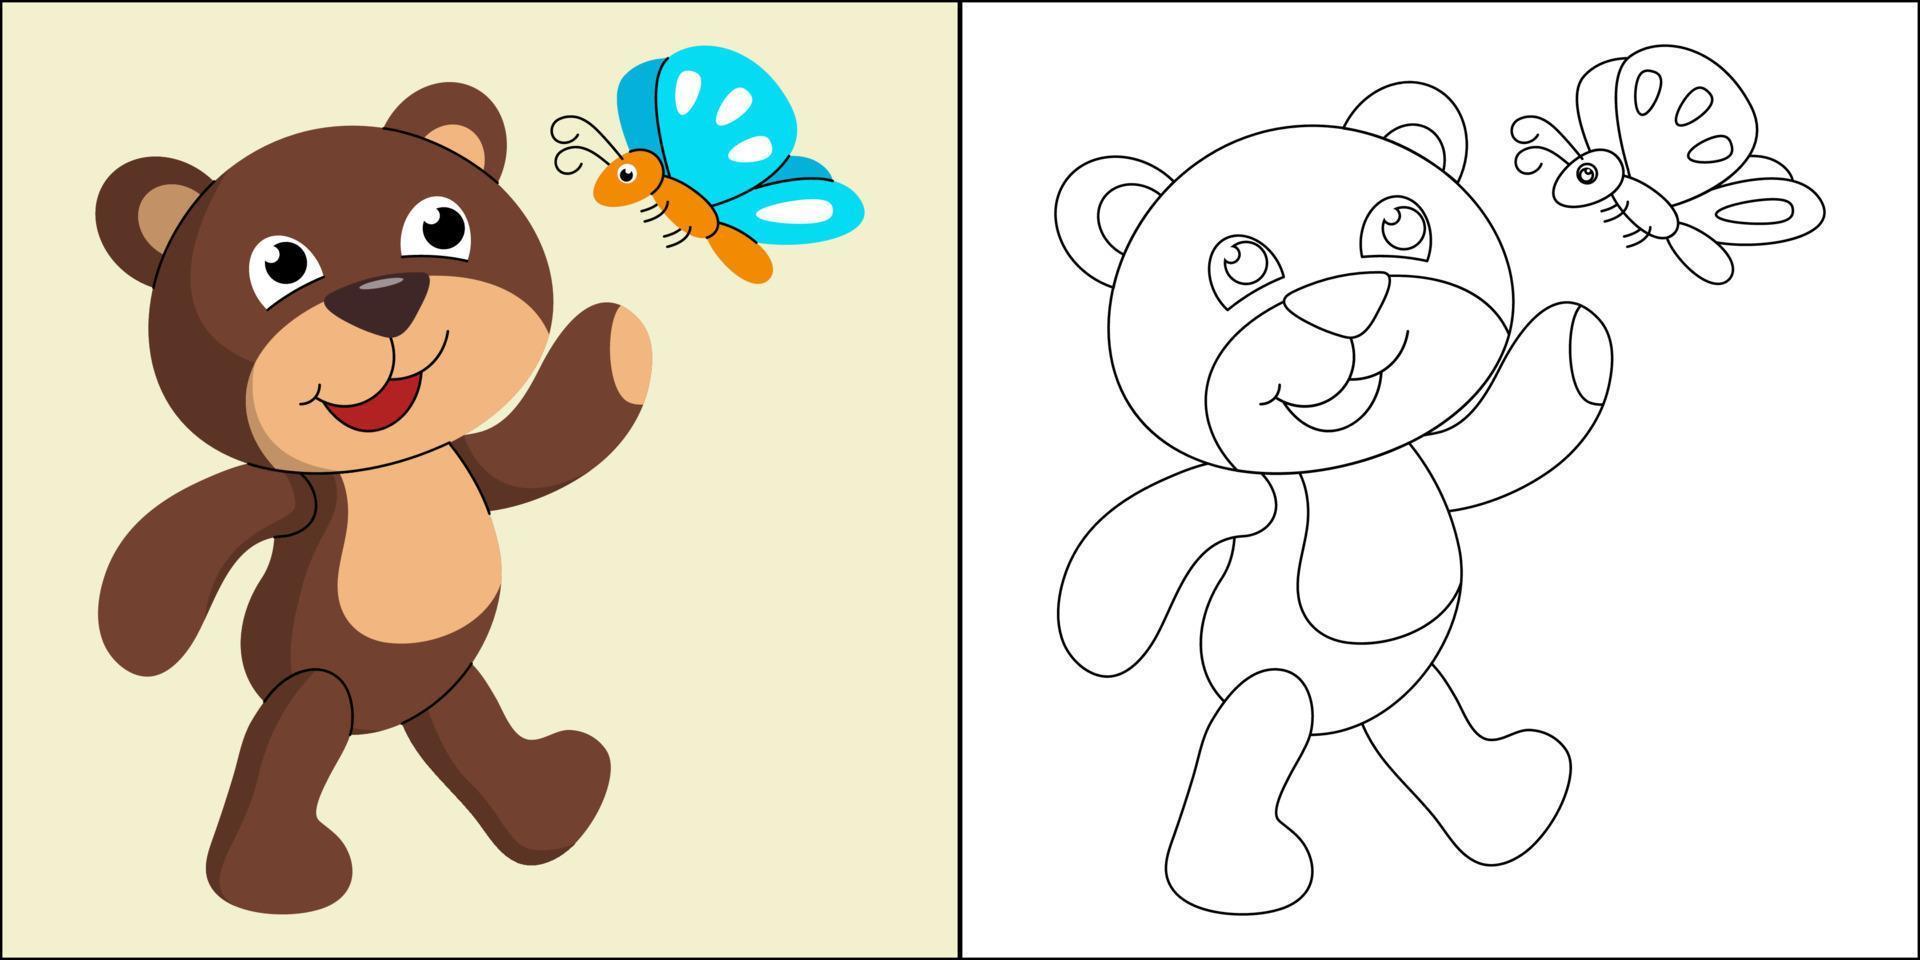 Cute bear and butterfly suitable for children's coloring page vector illustration